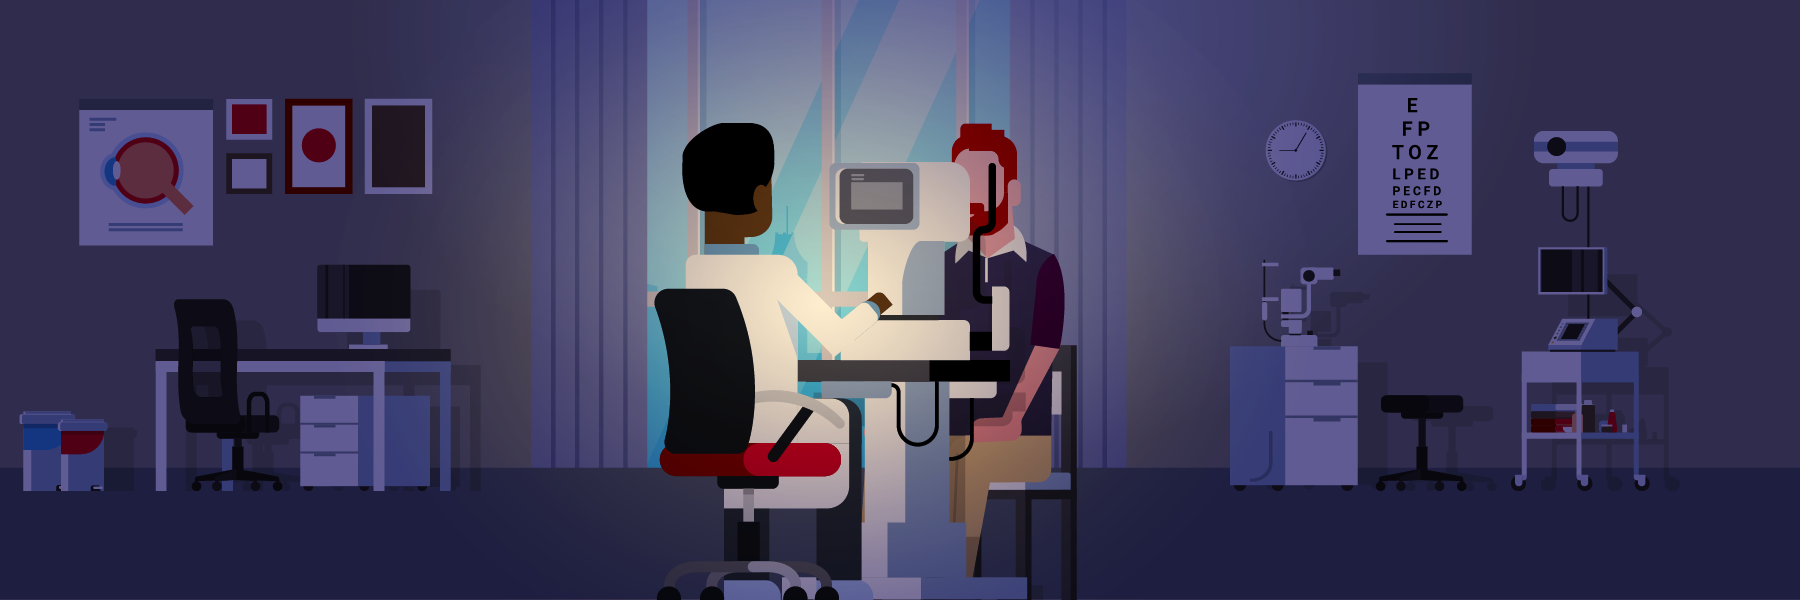 web banner vector image of a male patient getting an eye exam from a male doctor in an eye doctor's office.